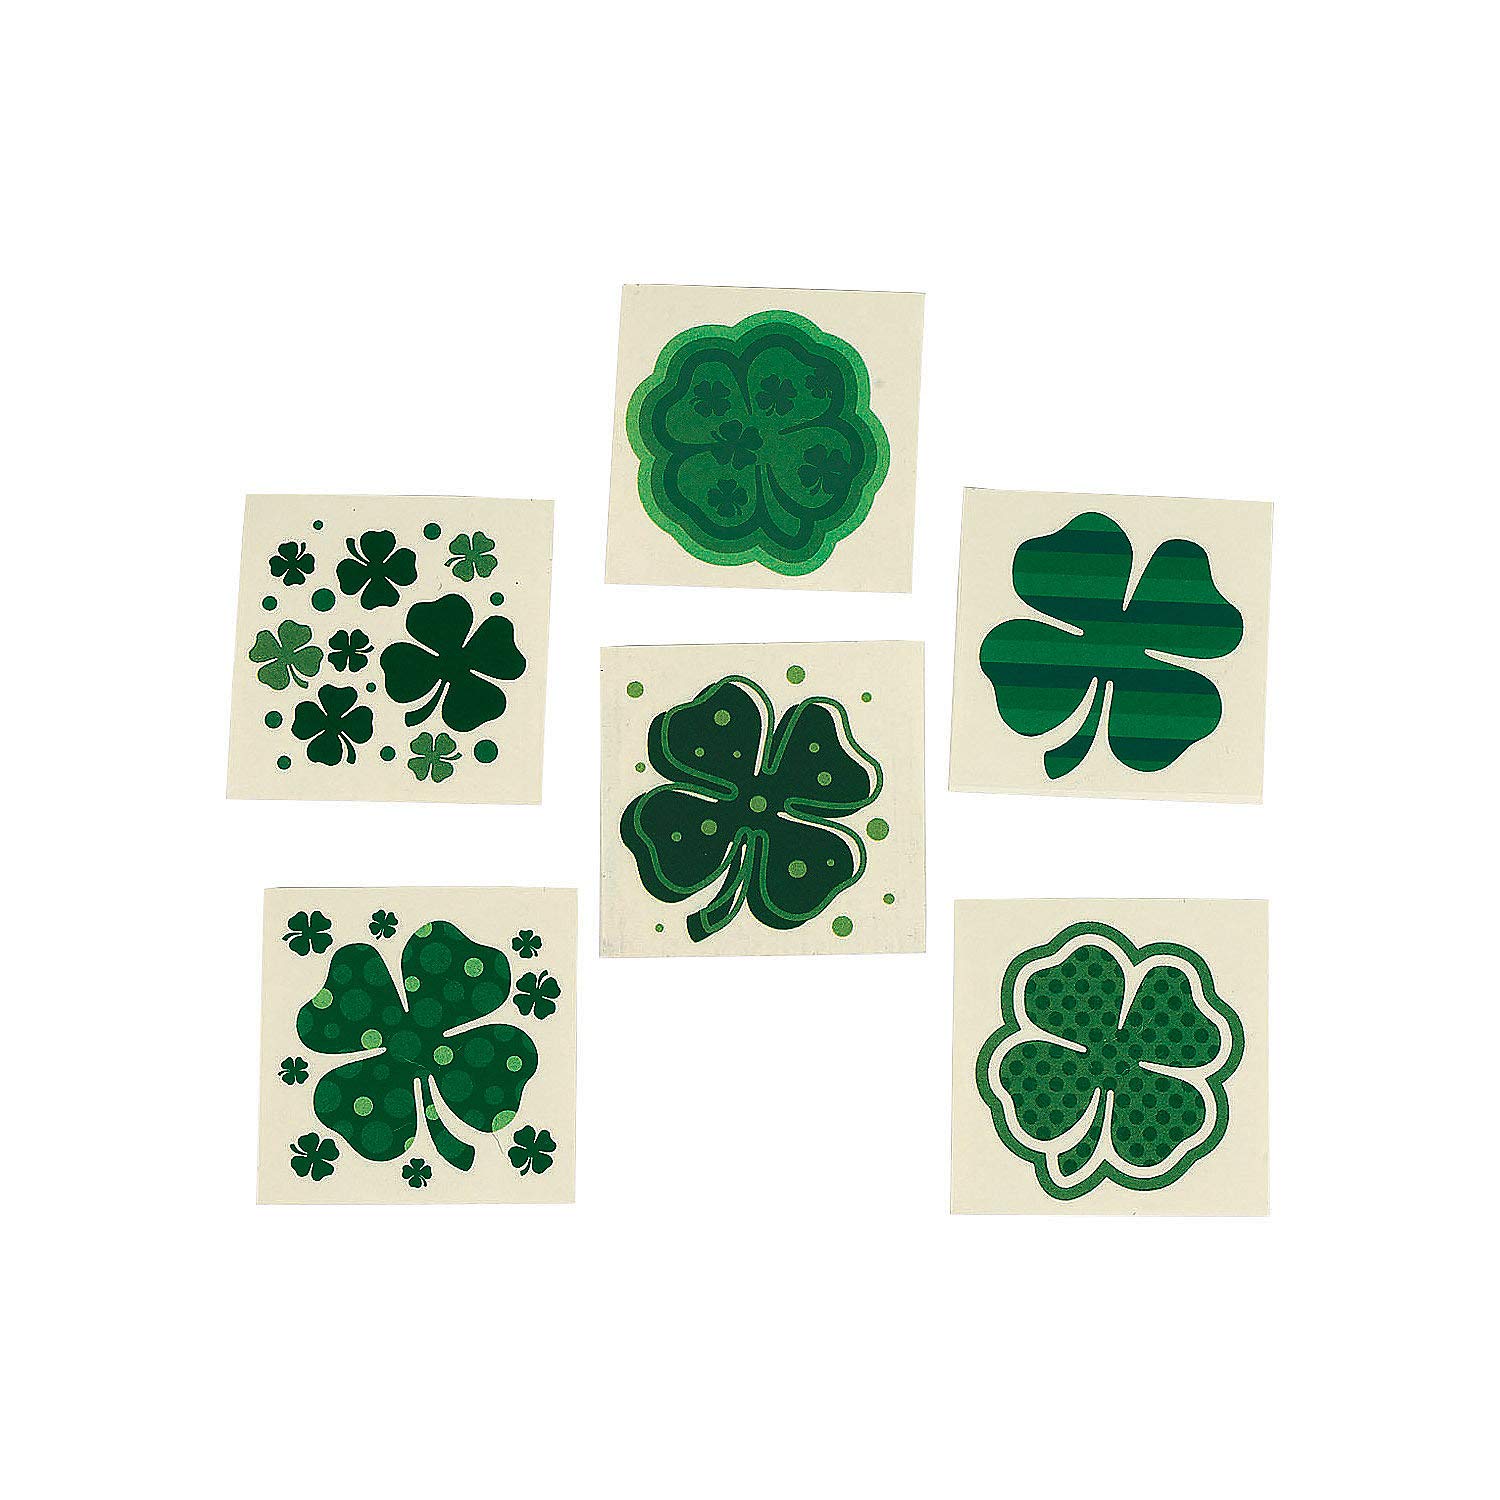 Book Cover Fun Express - Shamrock Patterned Tattoos for St. Patrick's Day - Apparel Accessories - Temporary Tattoos - Regular Tattoos - St. Patrick's Day - 72 Pieces